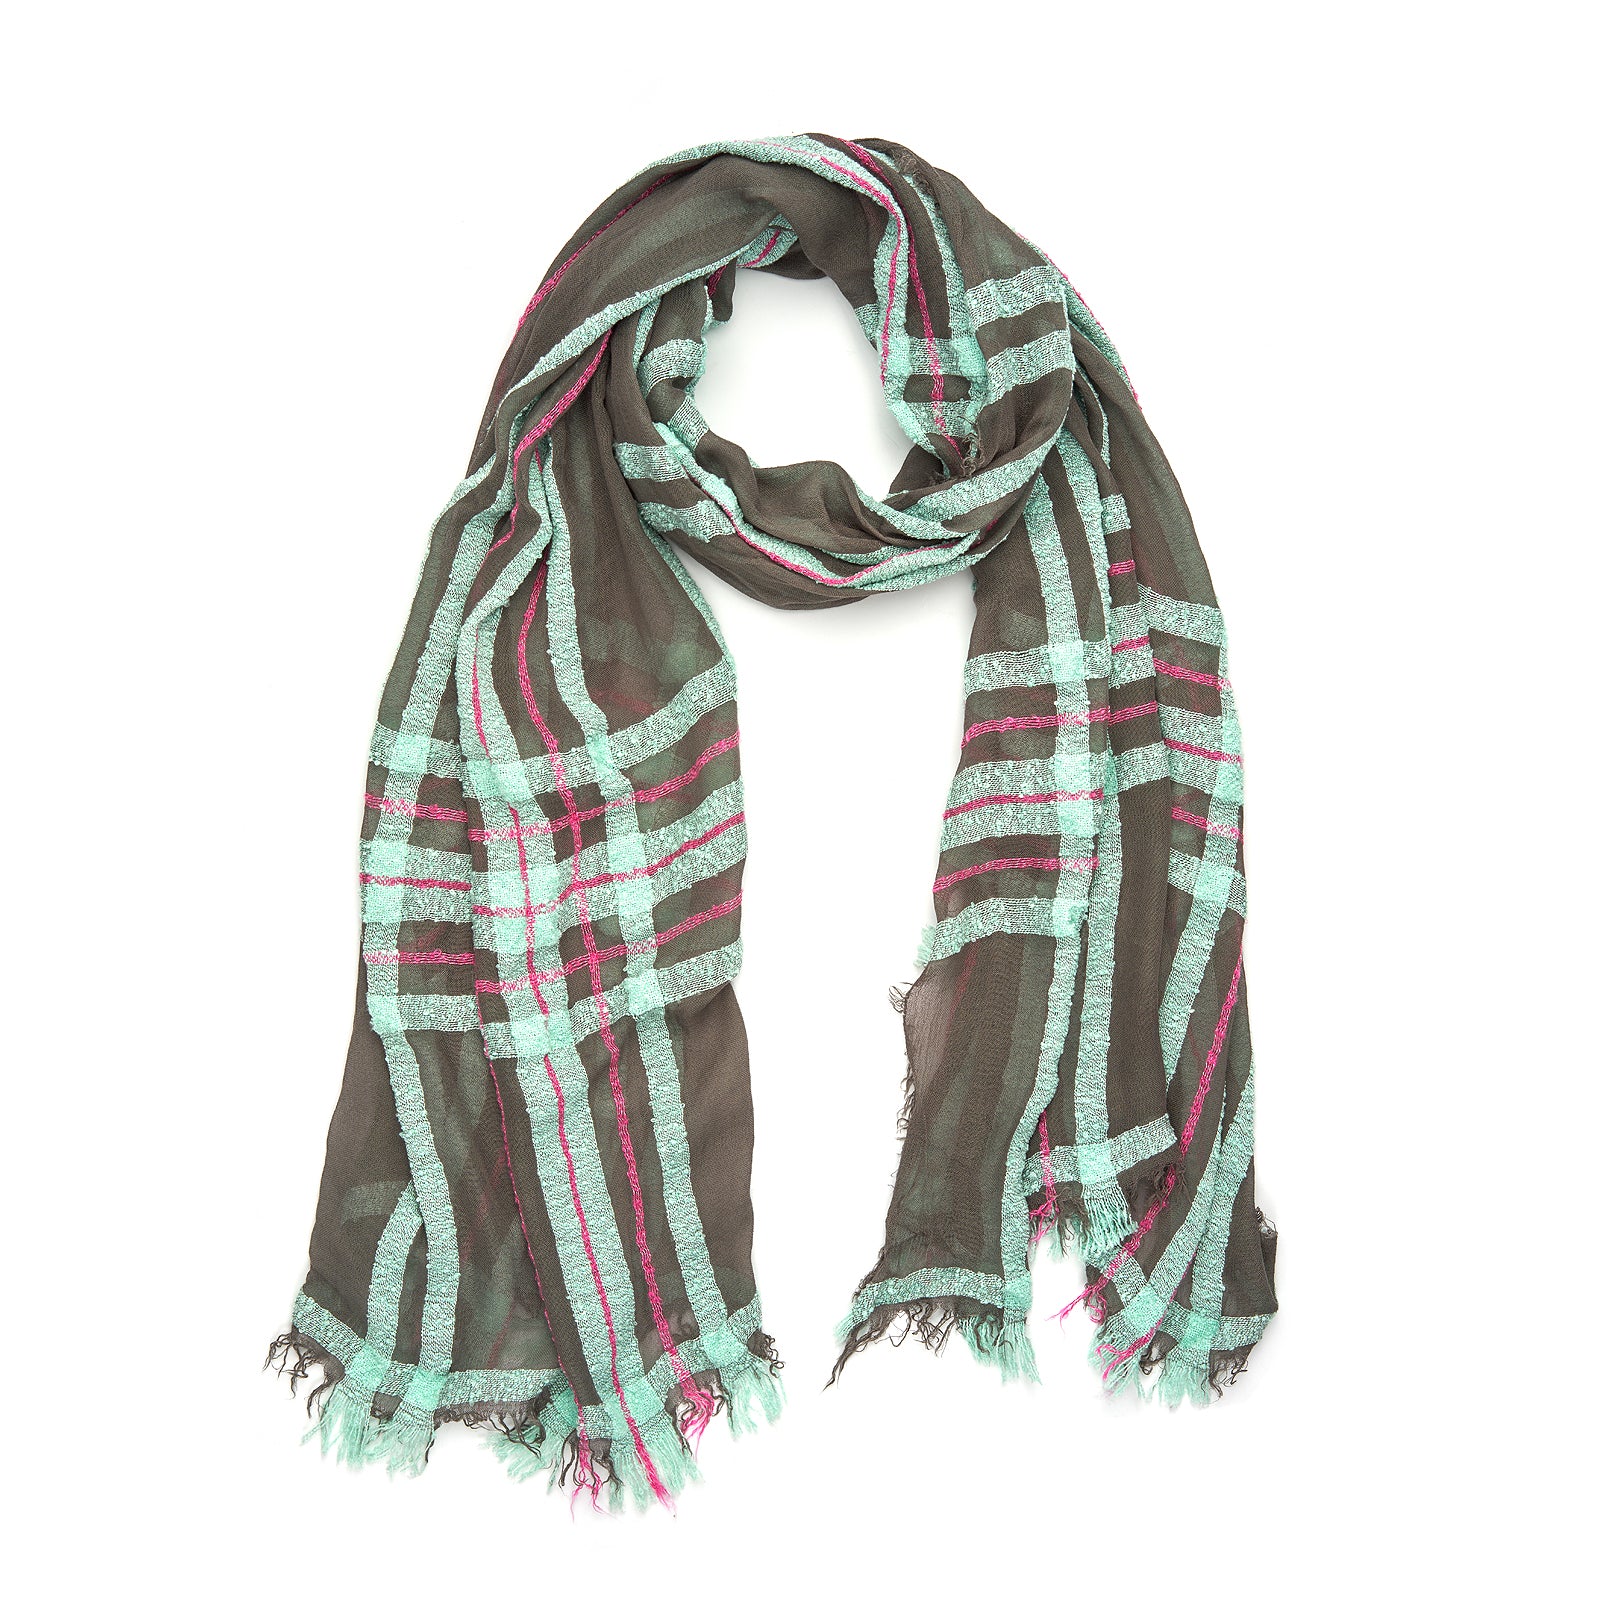 Thick check scarf